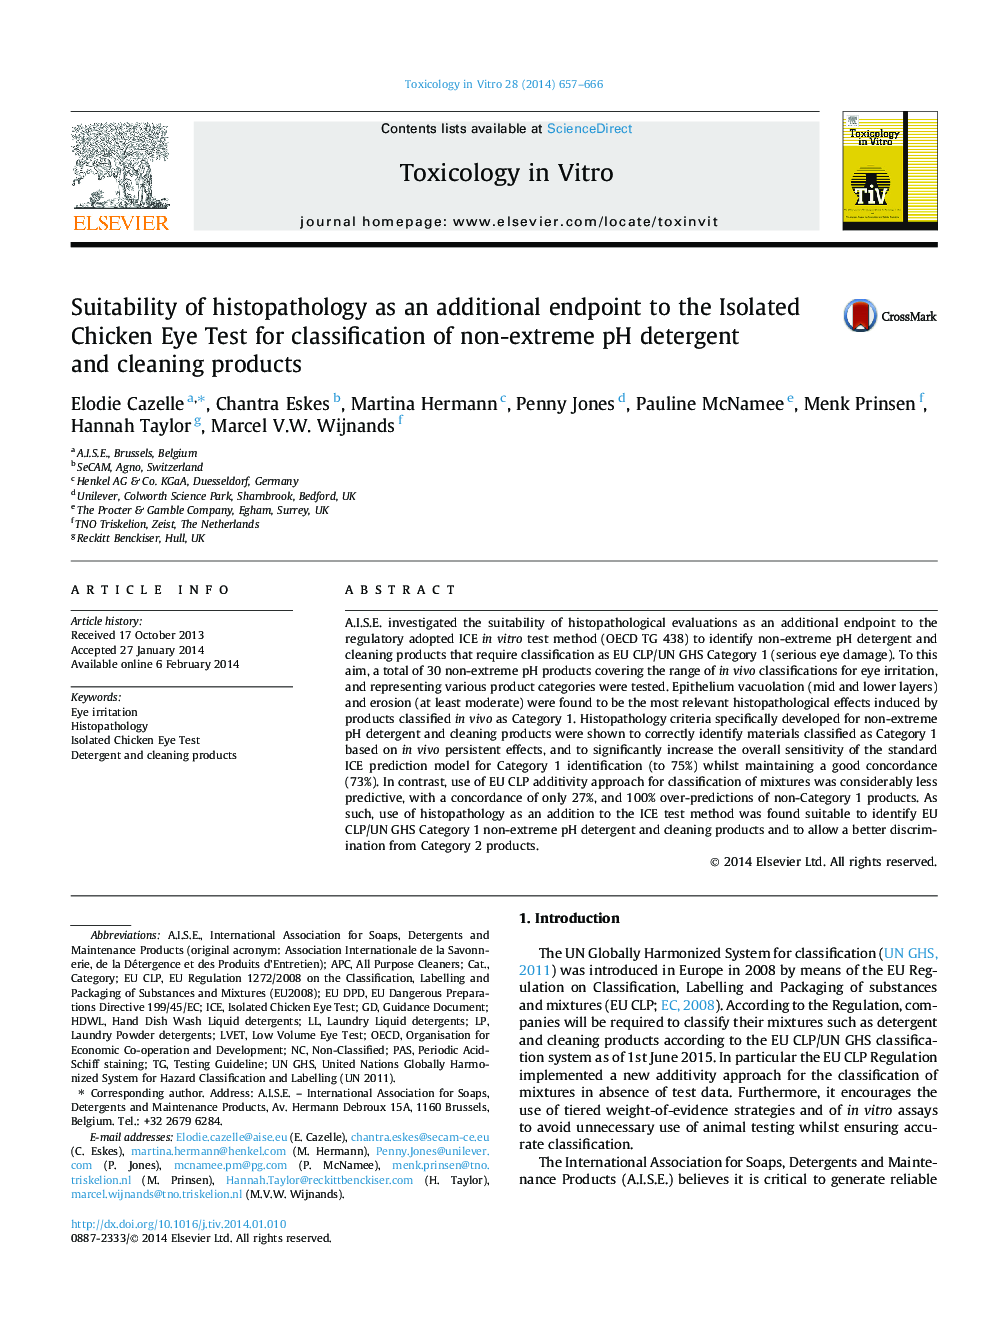 Suitability of histopathology as an additional endpoint to the Isolated Chicken Eye Test for classification of non-extreme pH detergent and cleaning products